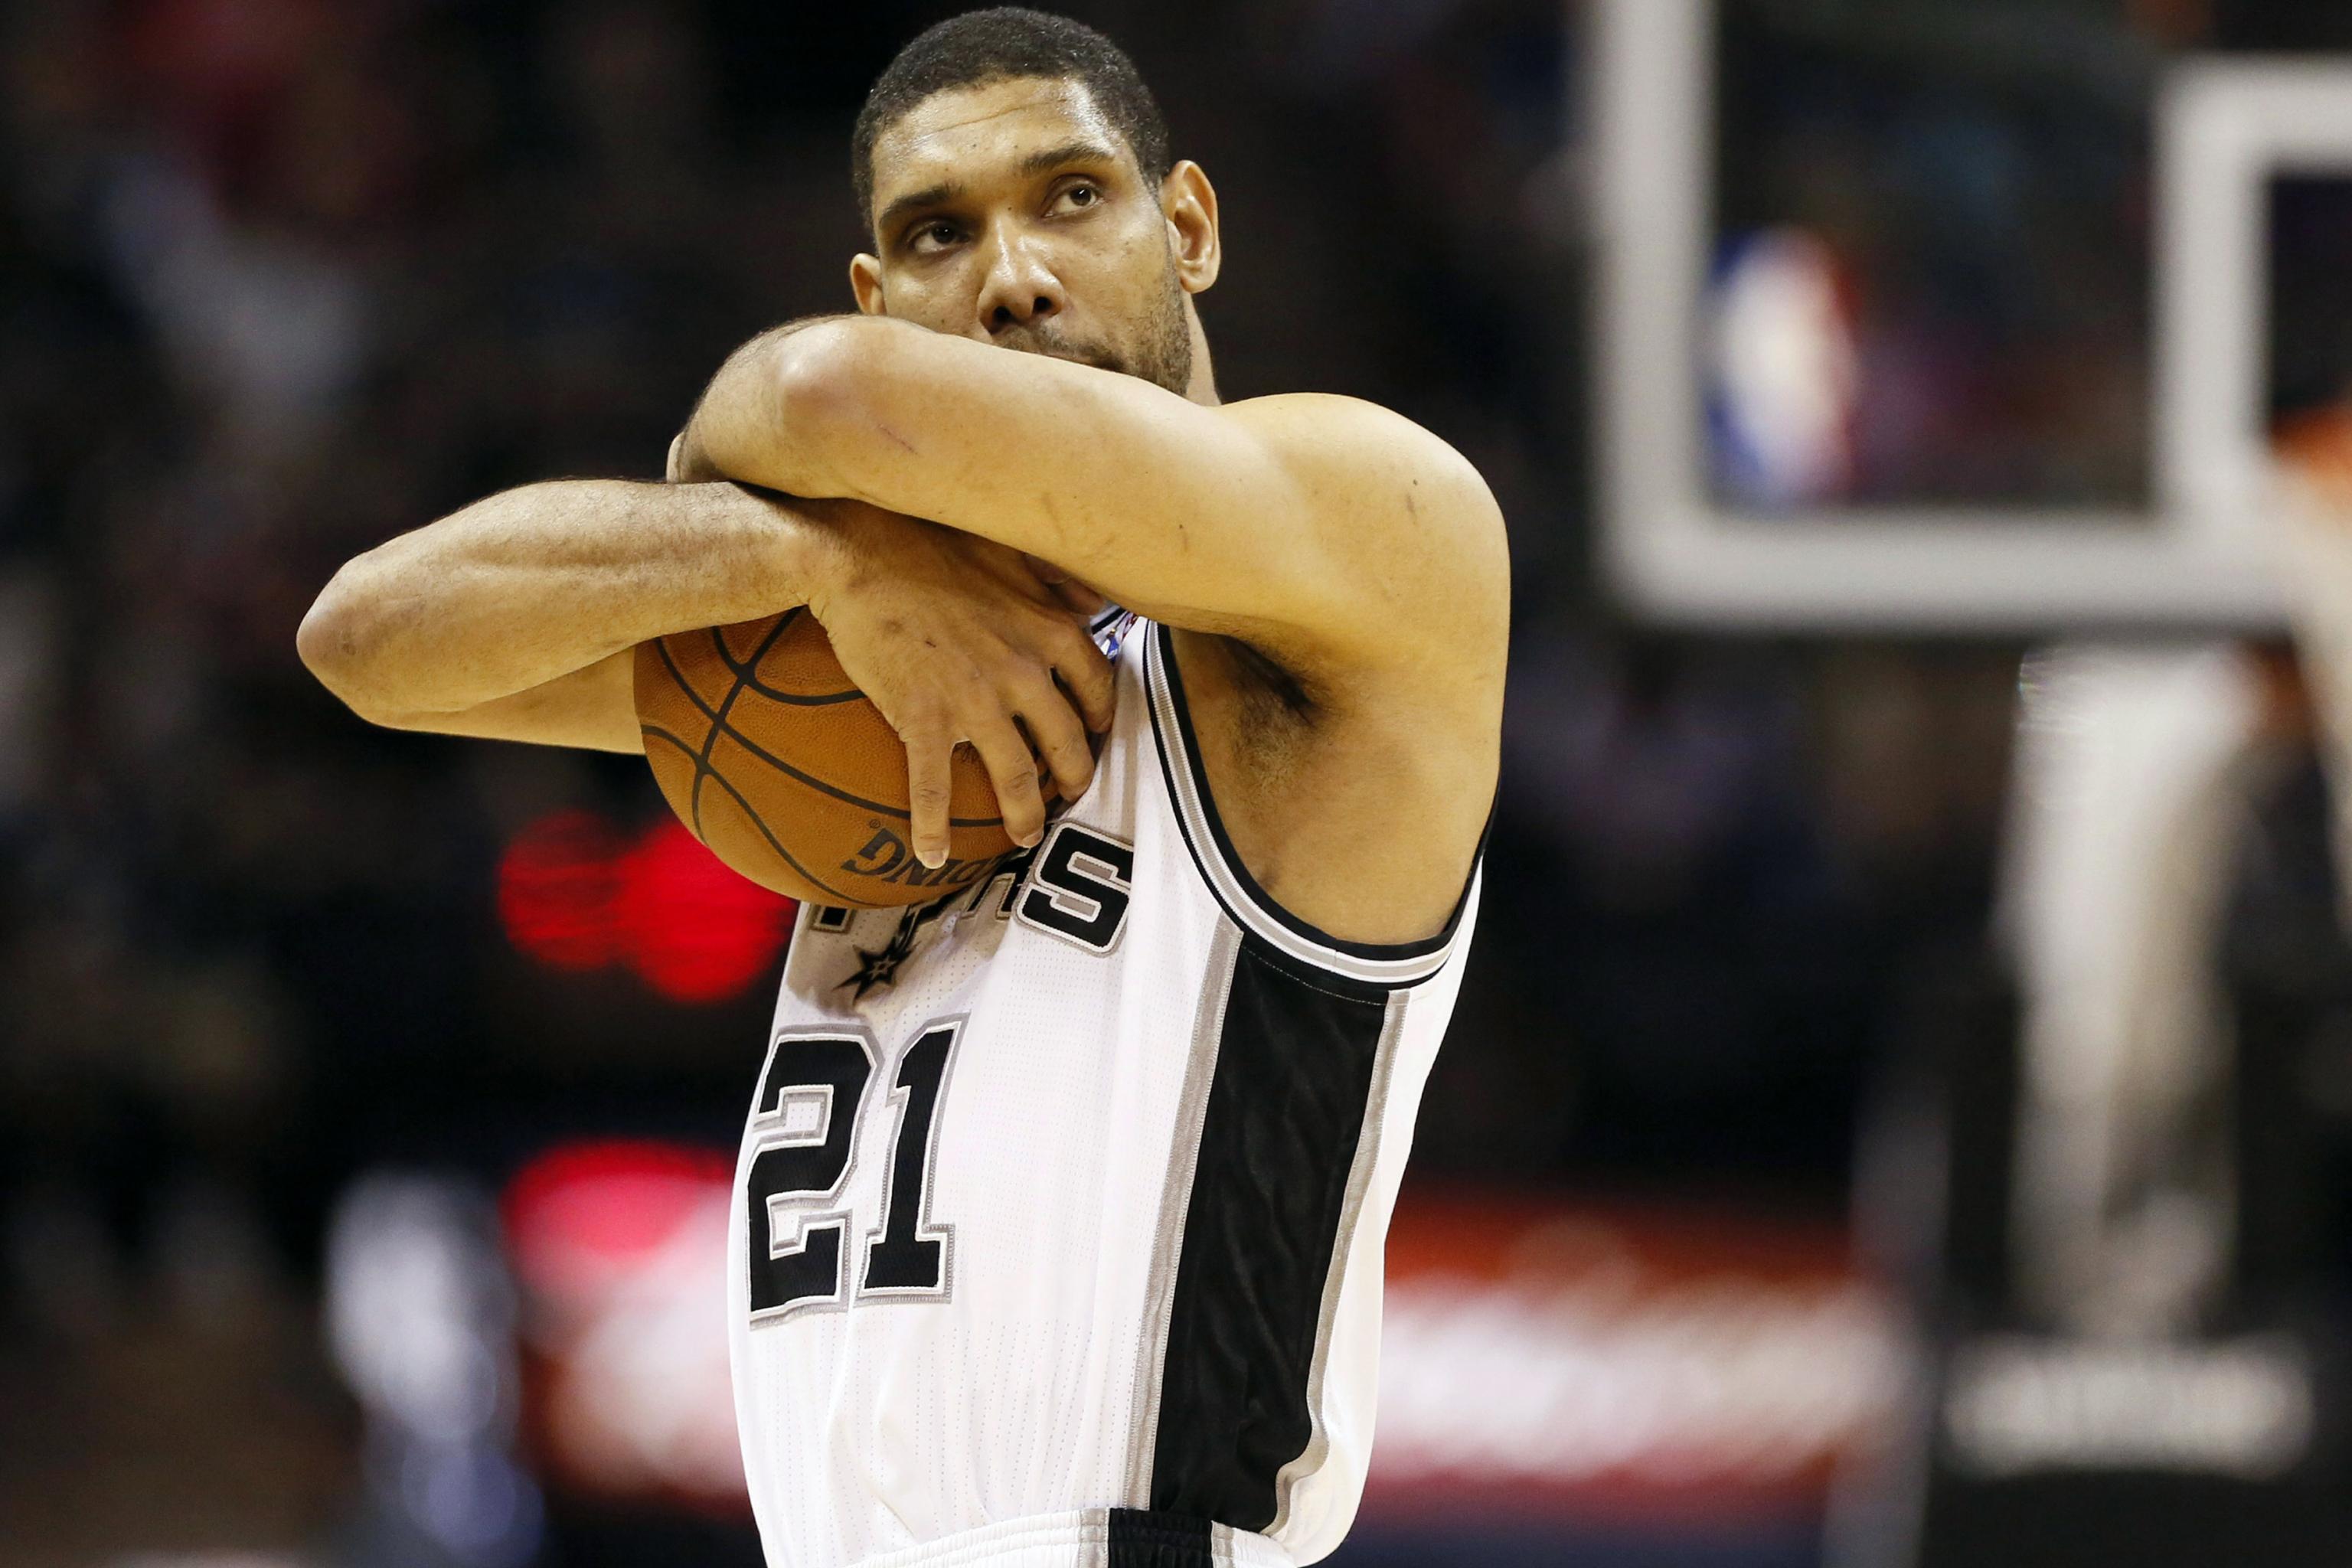 NBA Legend Tim Duncan Looks Like A Completely Different Person